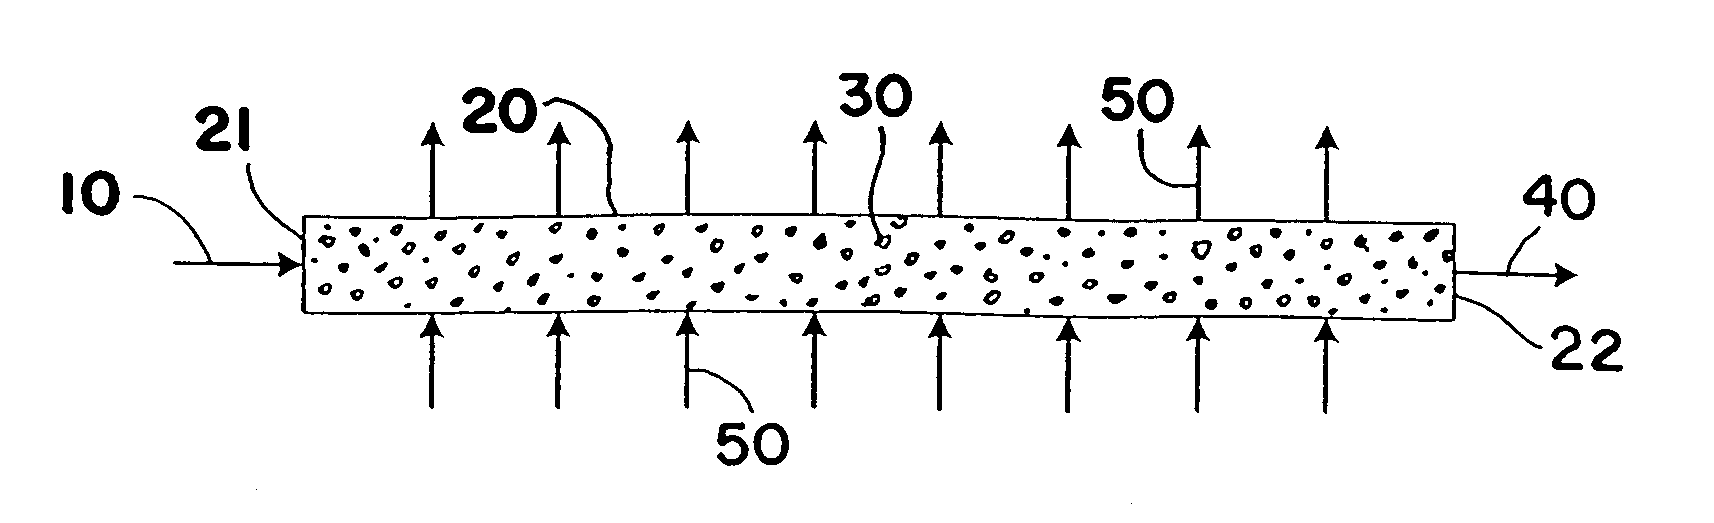 Process for conducting an equilibrium limited chemical reaction in a single stage process channel